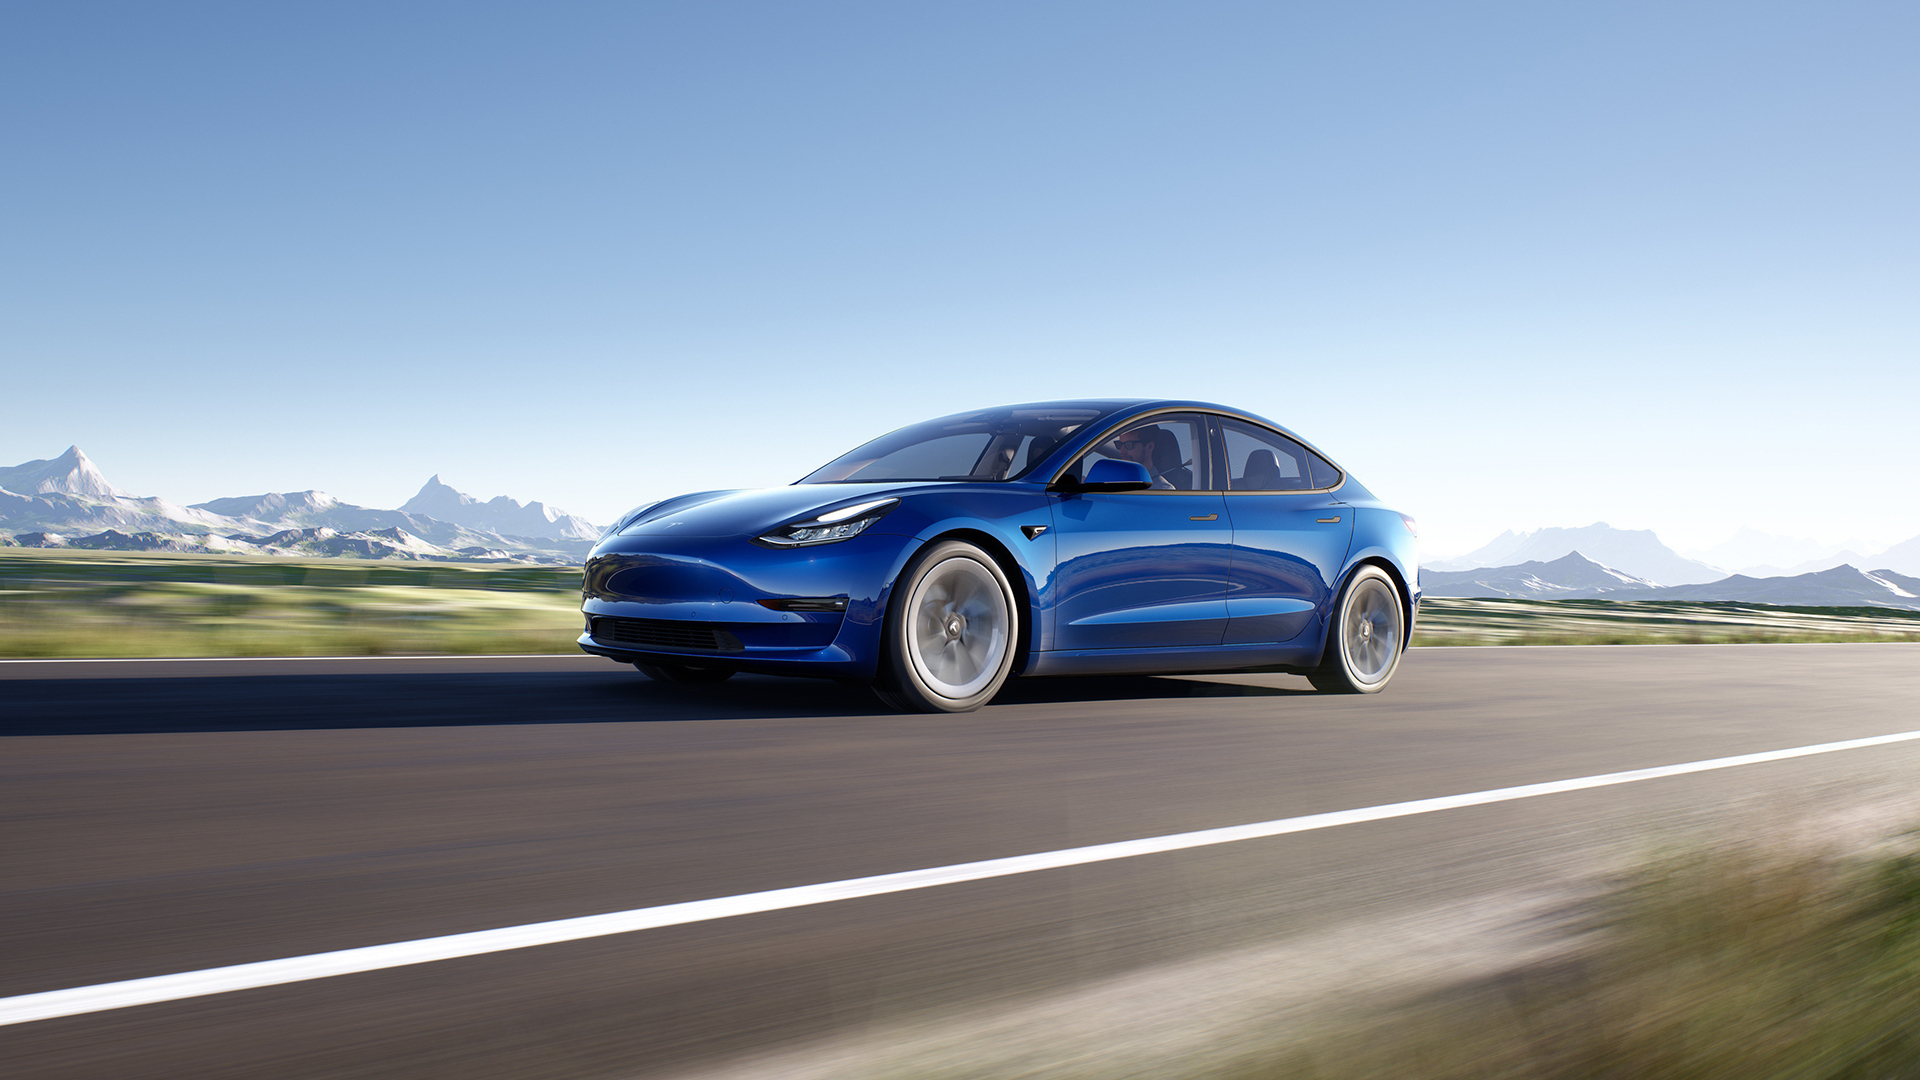 Tesla drops prices again, with Model 3 and Model Y now discounted in the US